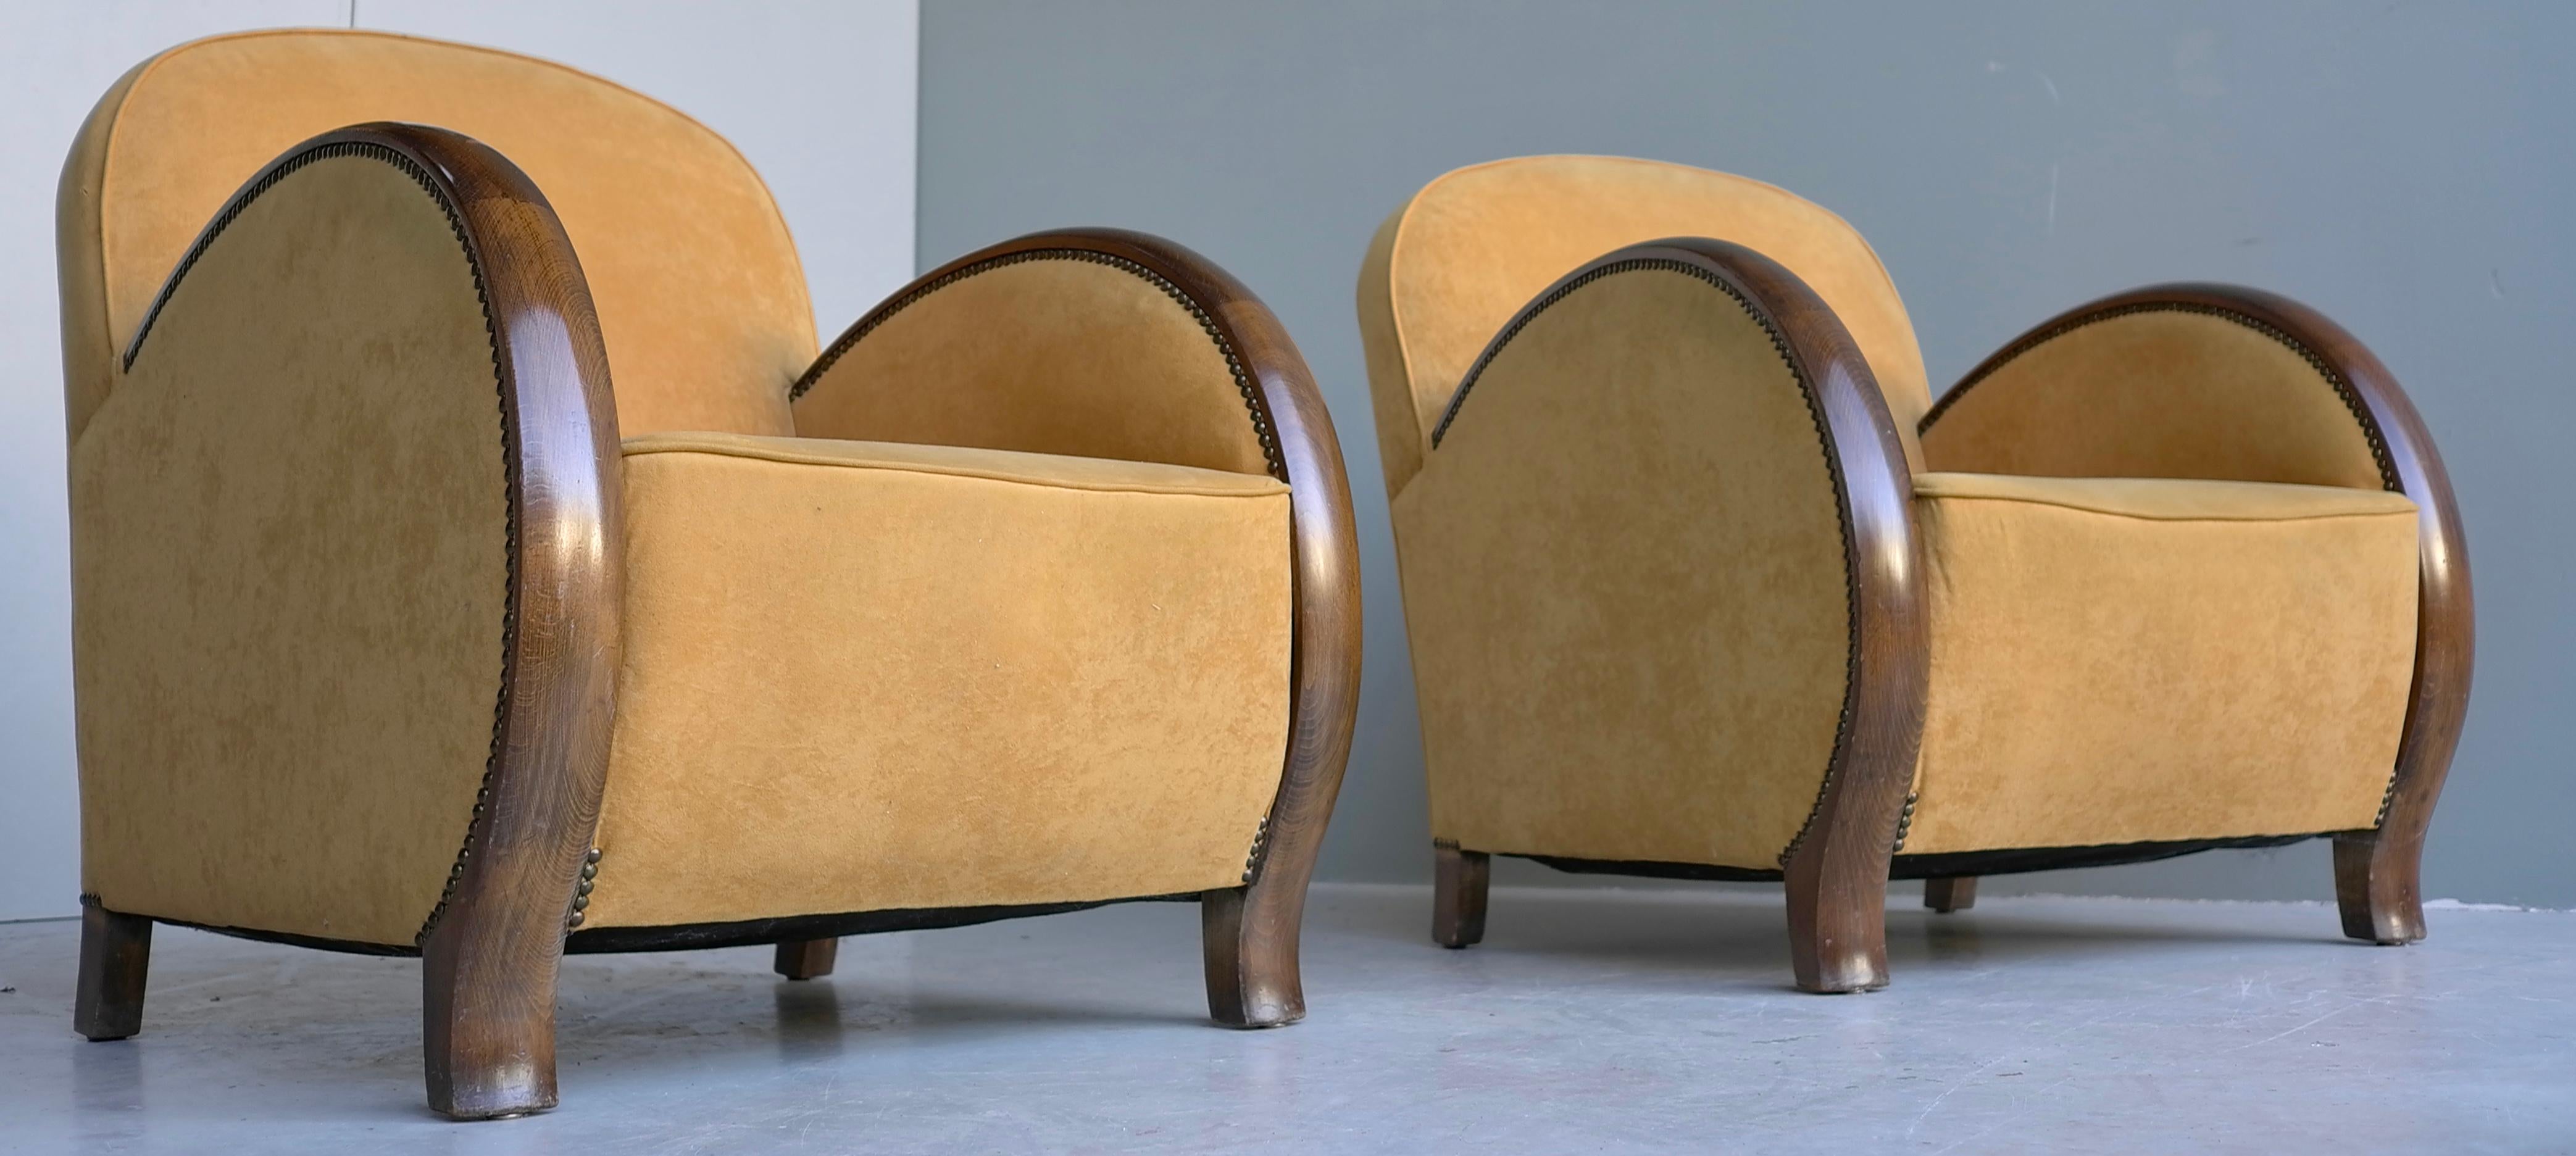 Pair of Art Deco Streamlined Armchairs in yellow Velvet with Wooden arms 1930's For Sale 3